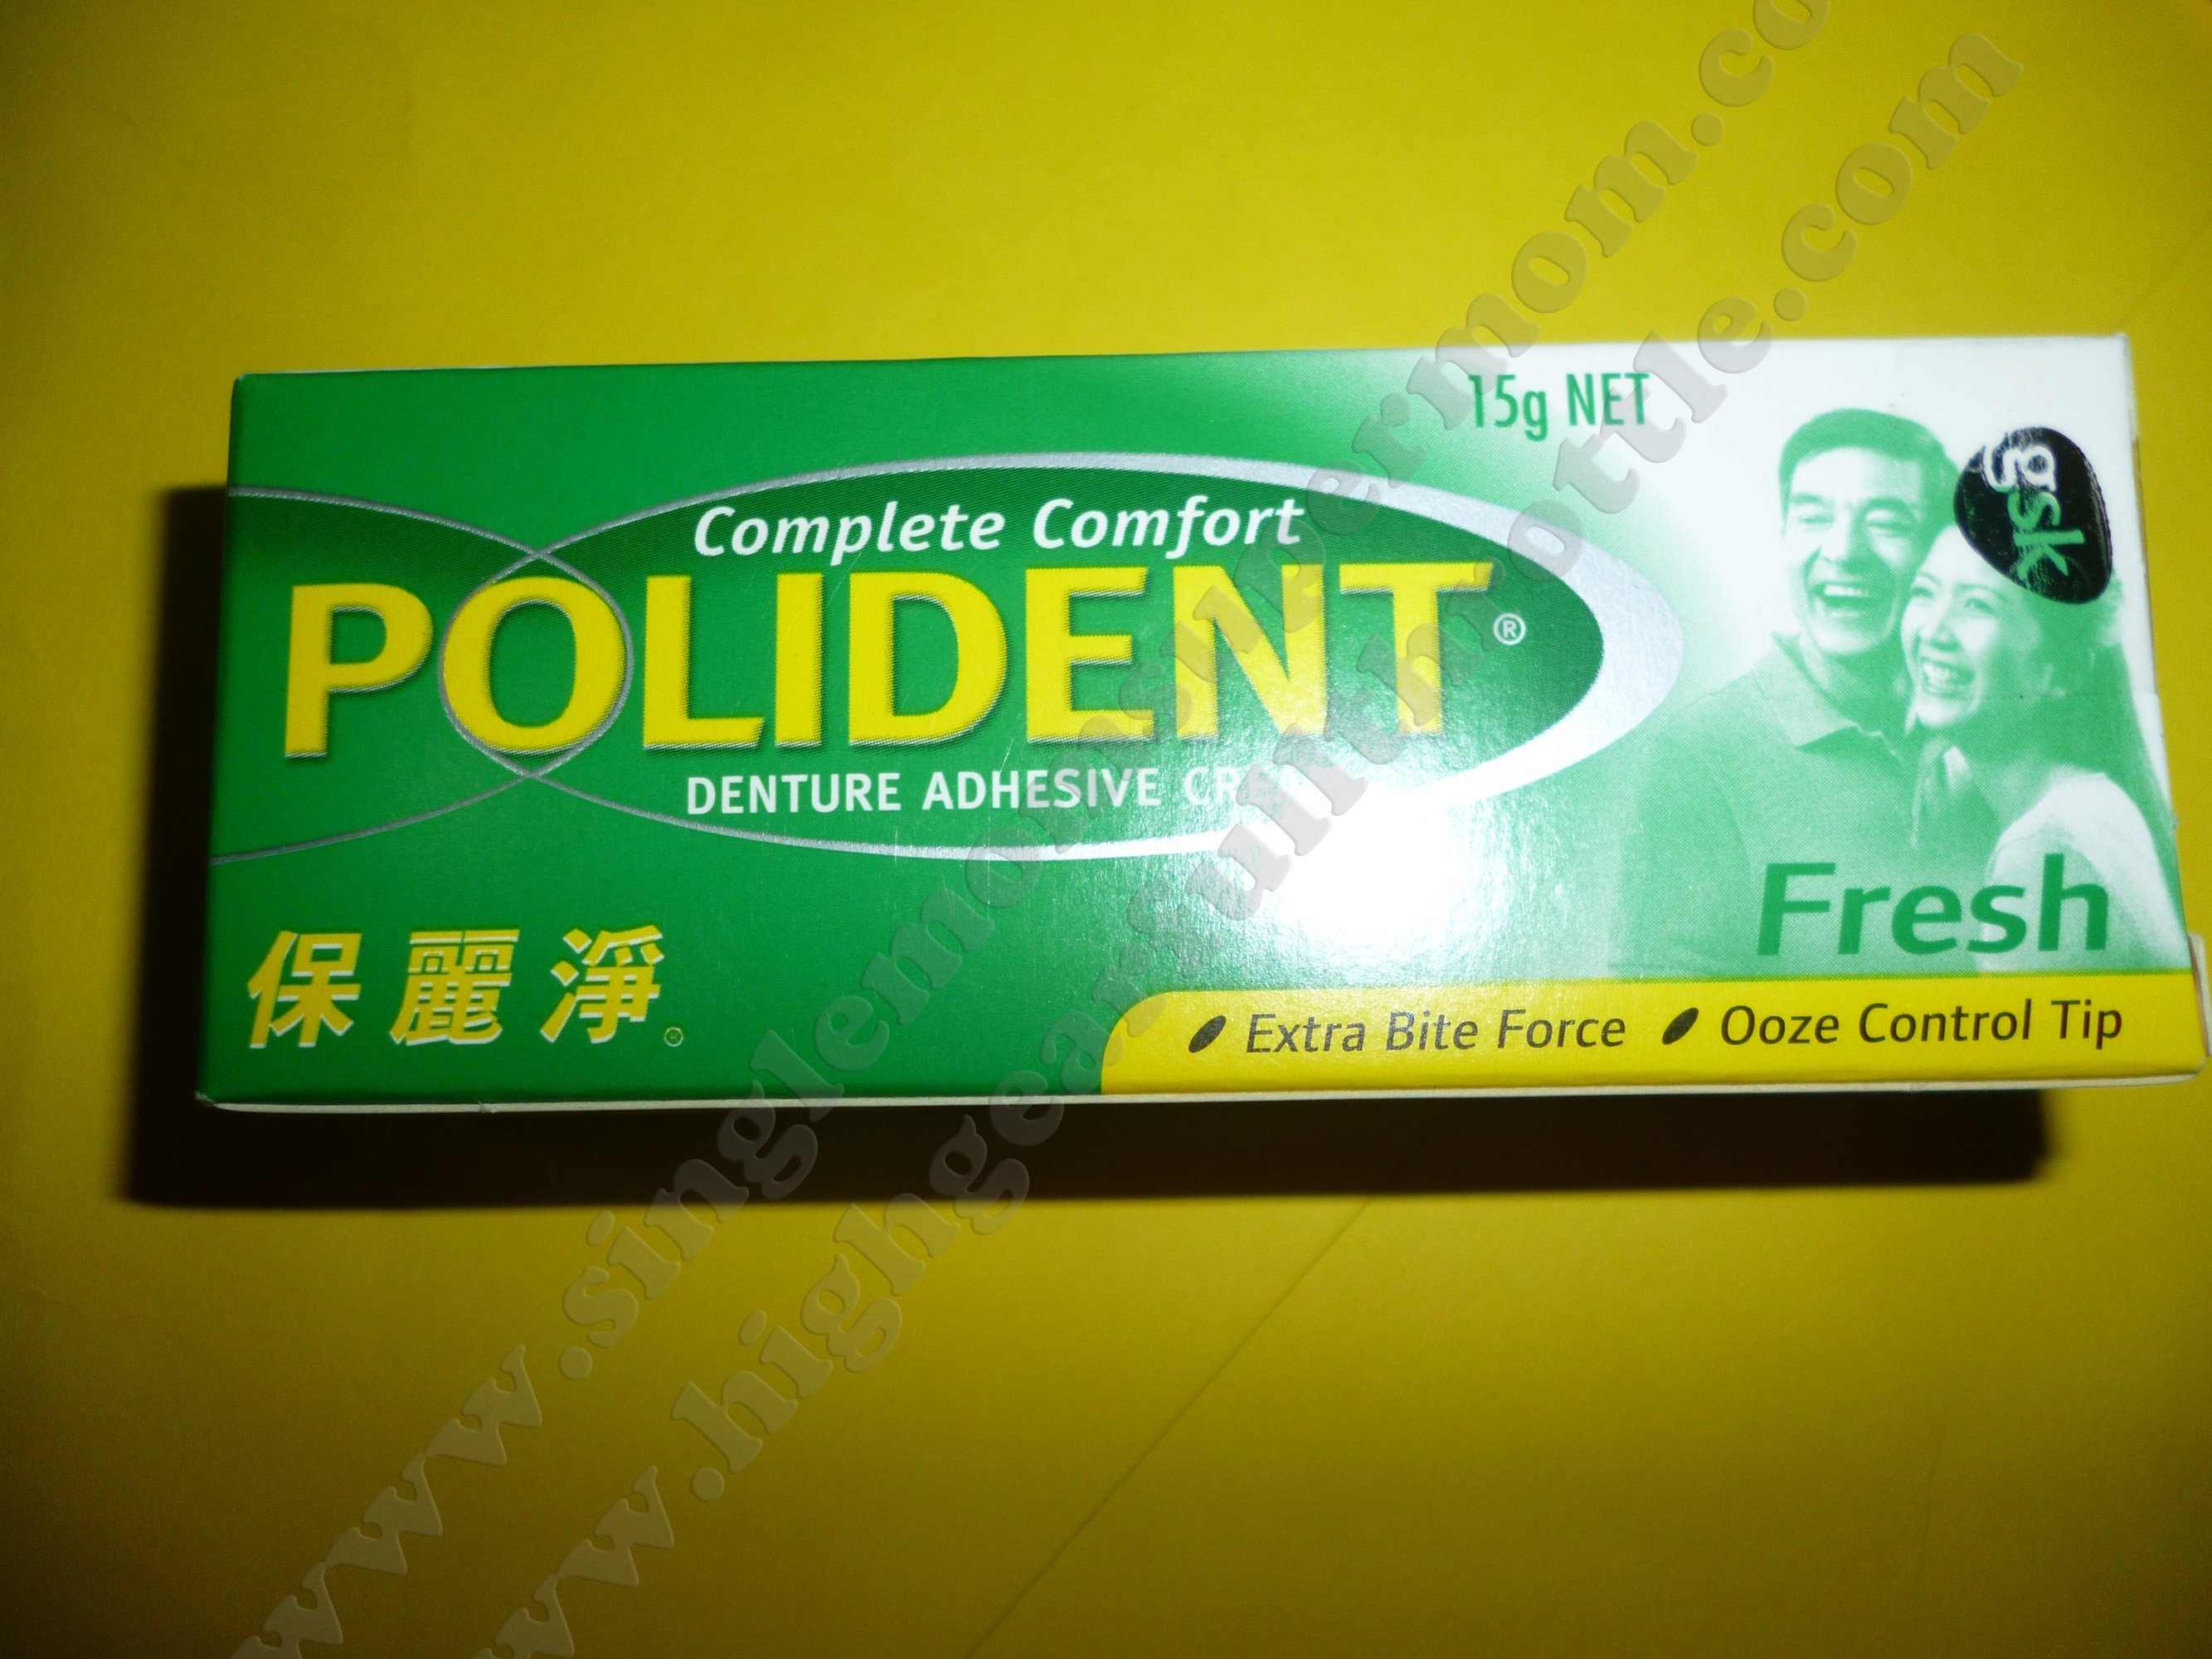 How to use Polident Denture Adhesive Cream